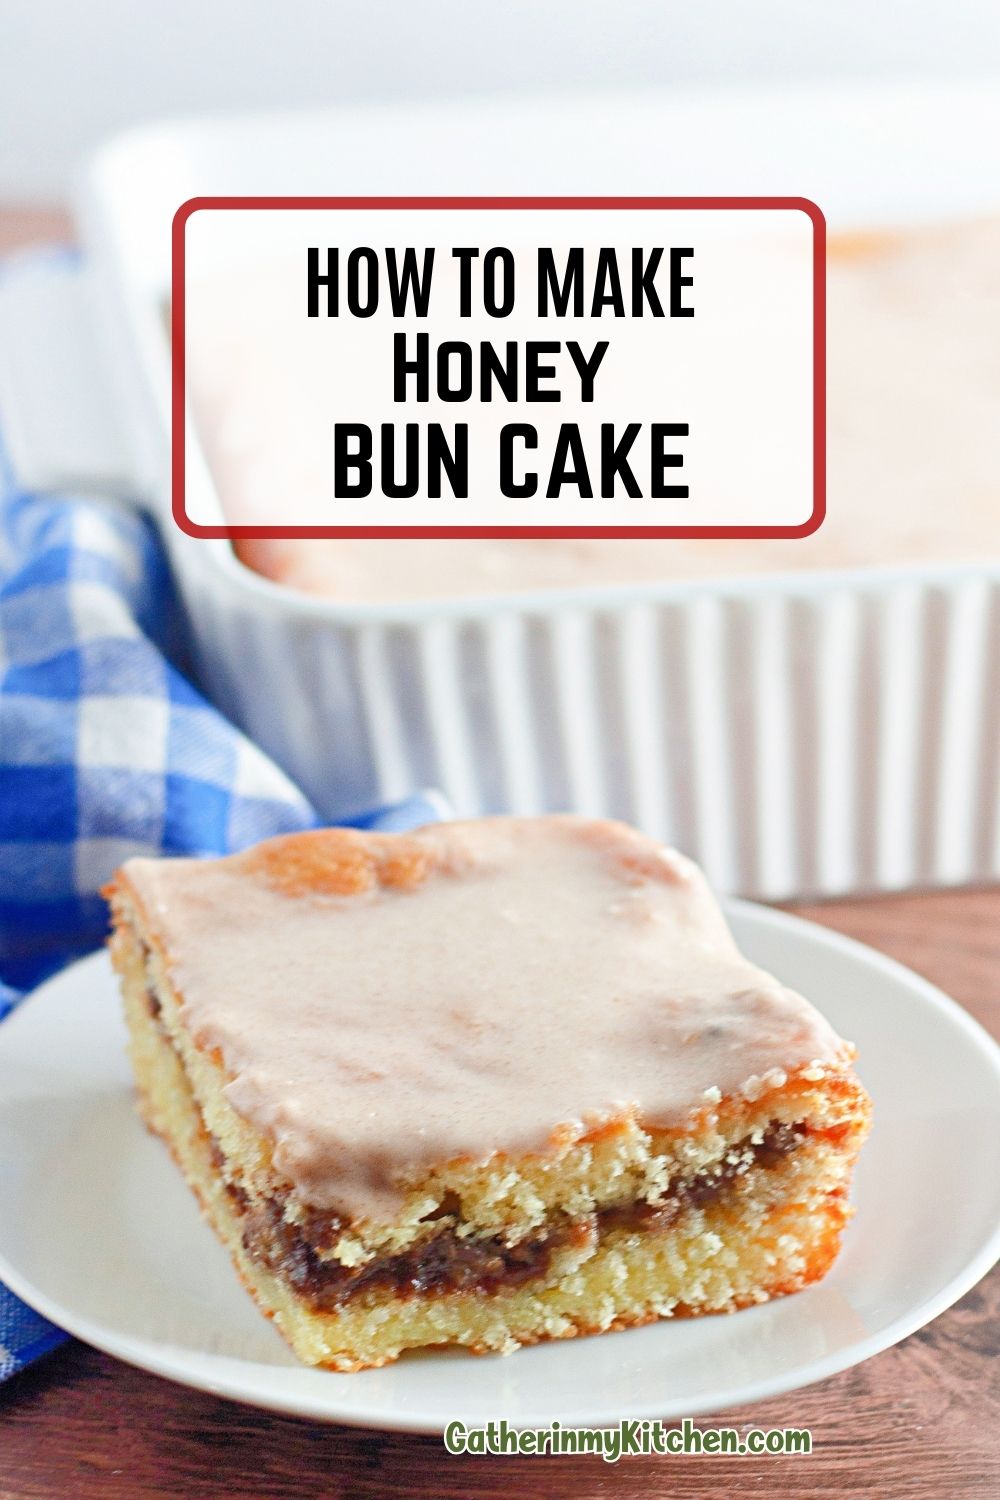 Pin image: honey bun cake on a plate with the words "How to make honey bun cake" in a box above.